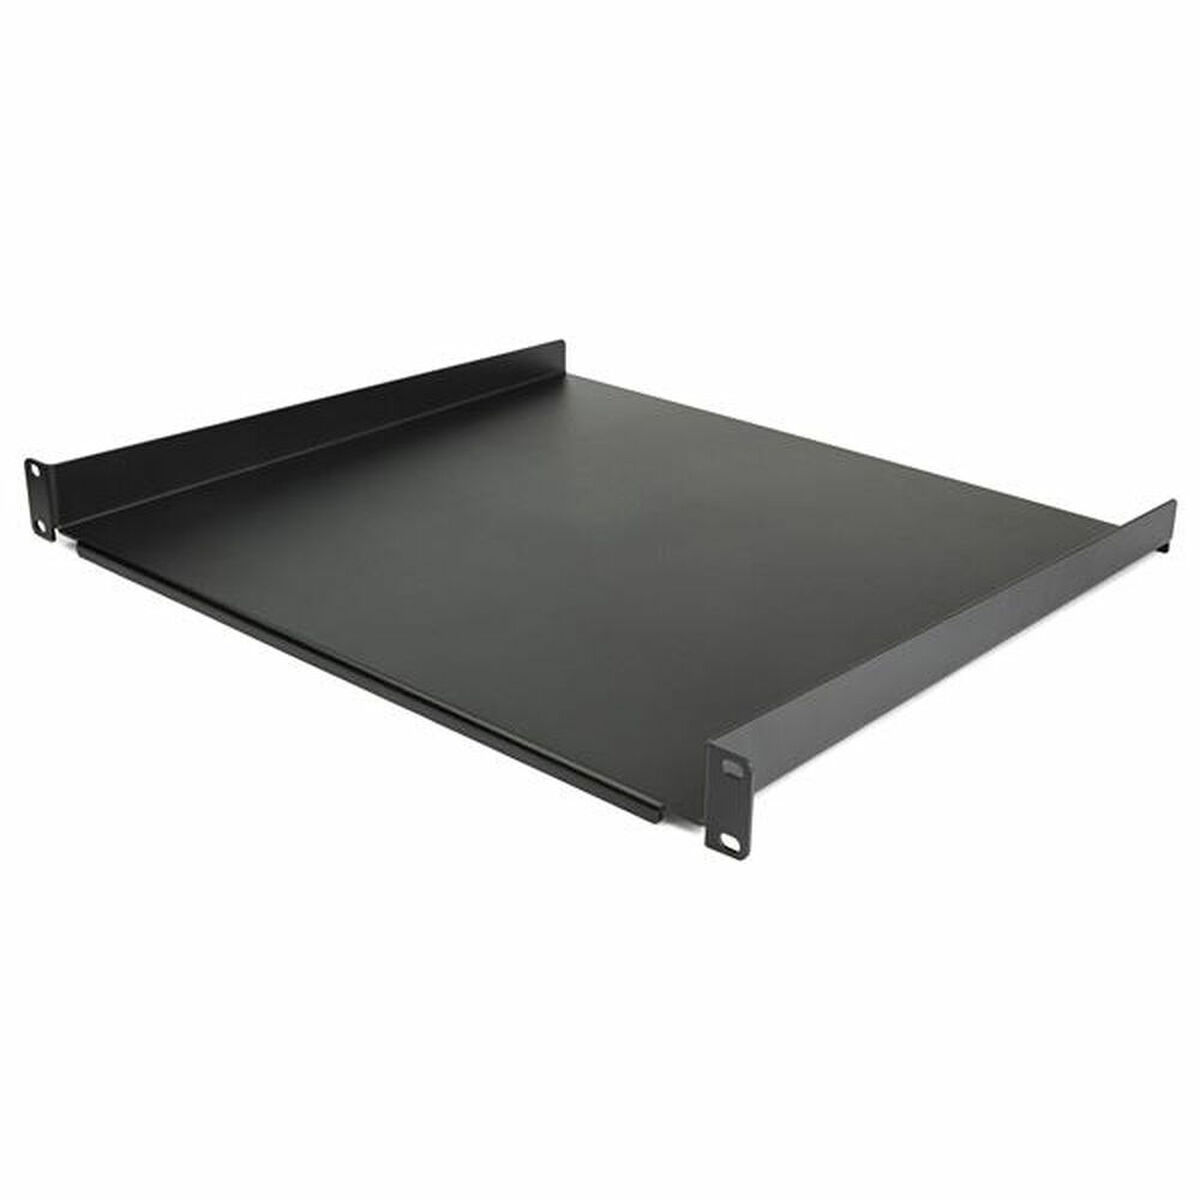 Fixed Tray for Rack Cabinet Startech CABSHELF116         